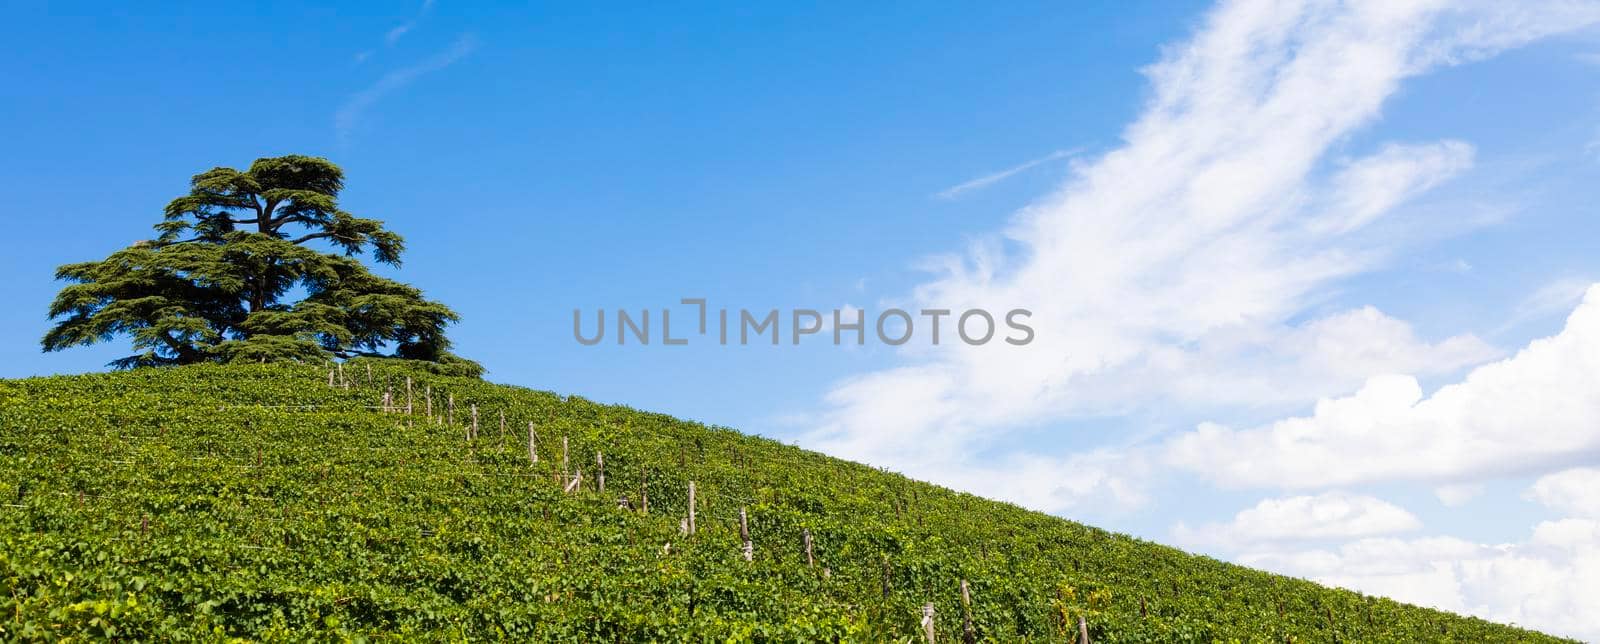 Panoramic countryside in Piedmont region, Italy. Scenic vineyard hill close to Barolo.